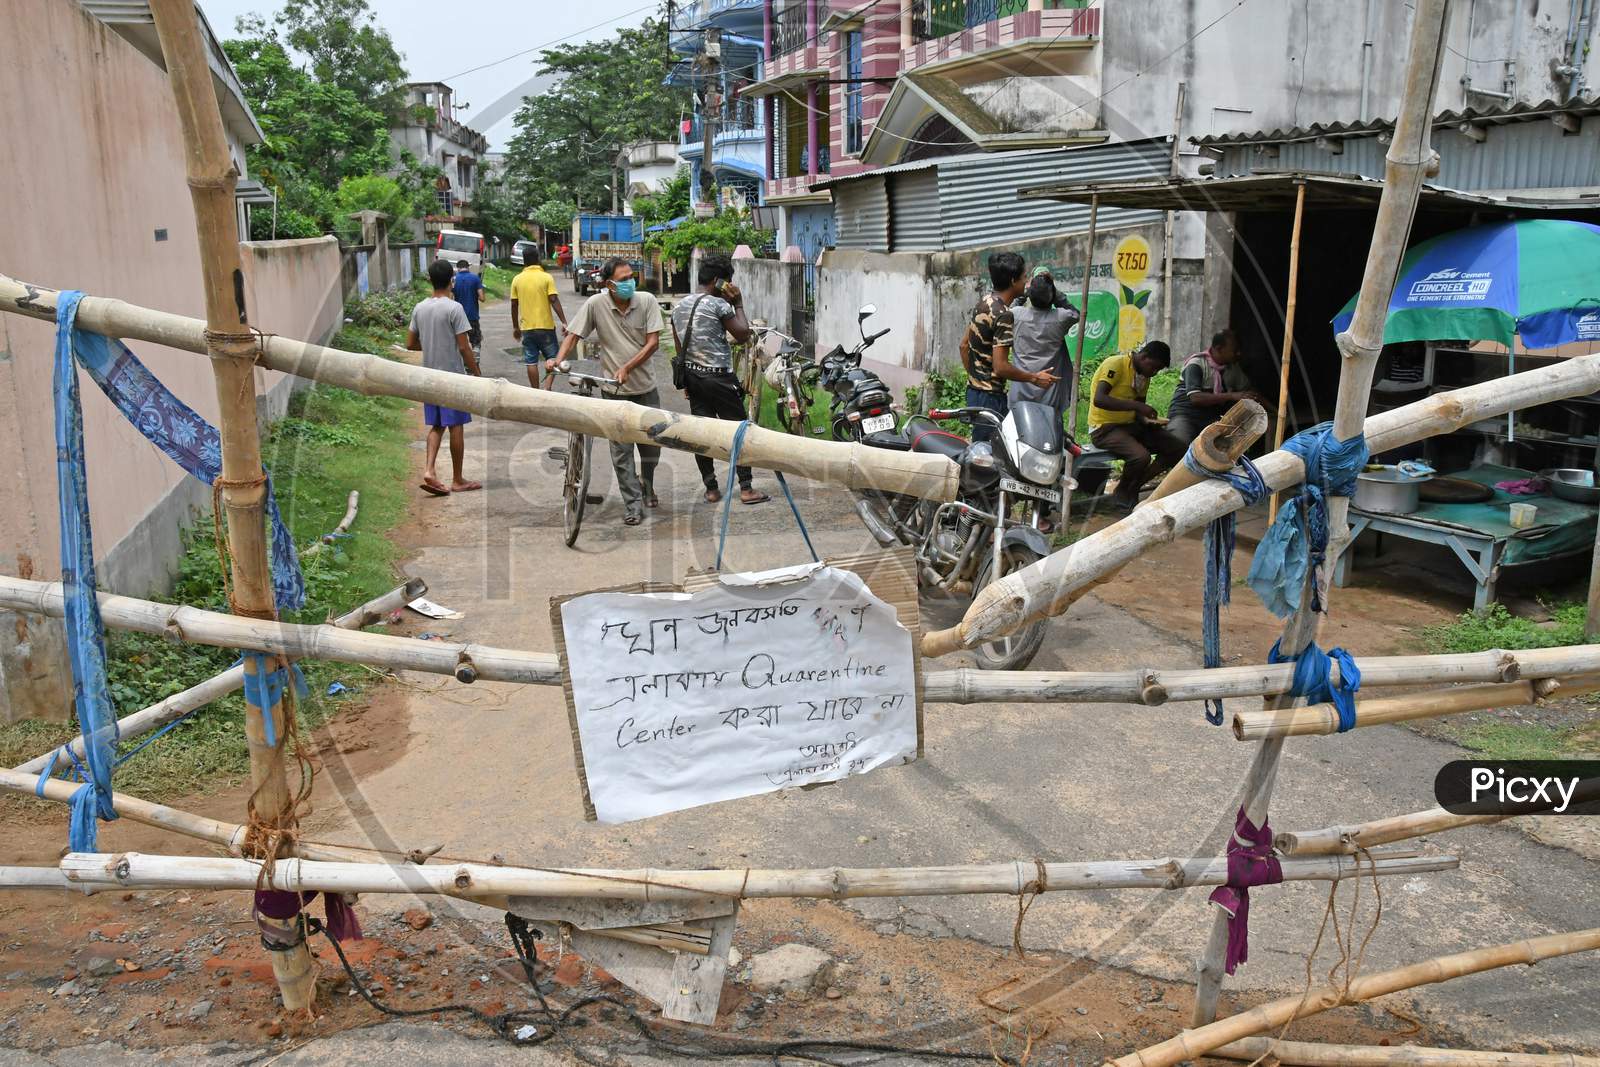 Local residents have barricaded the road in front of the school with bamboo to prevent it from being used as a Novel Coronavirus (COVID-19) related quarantine center at a school in Burdwan Town.